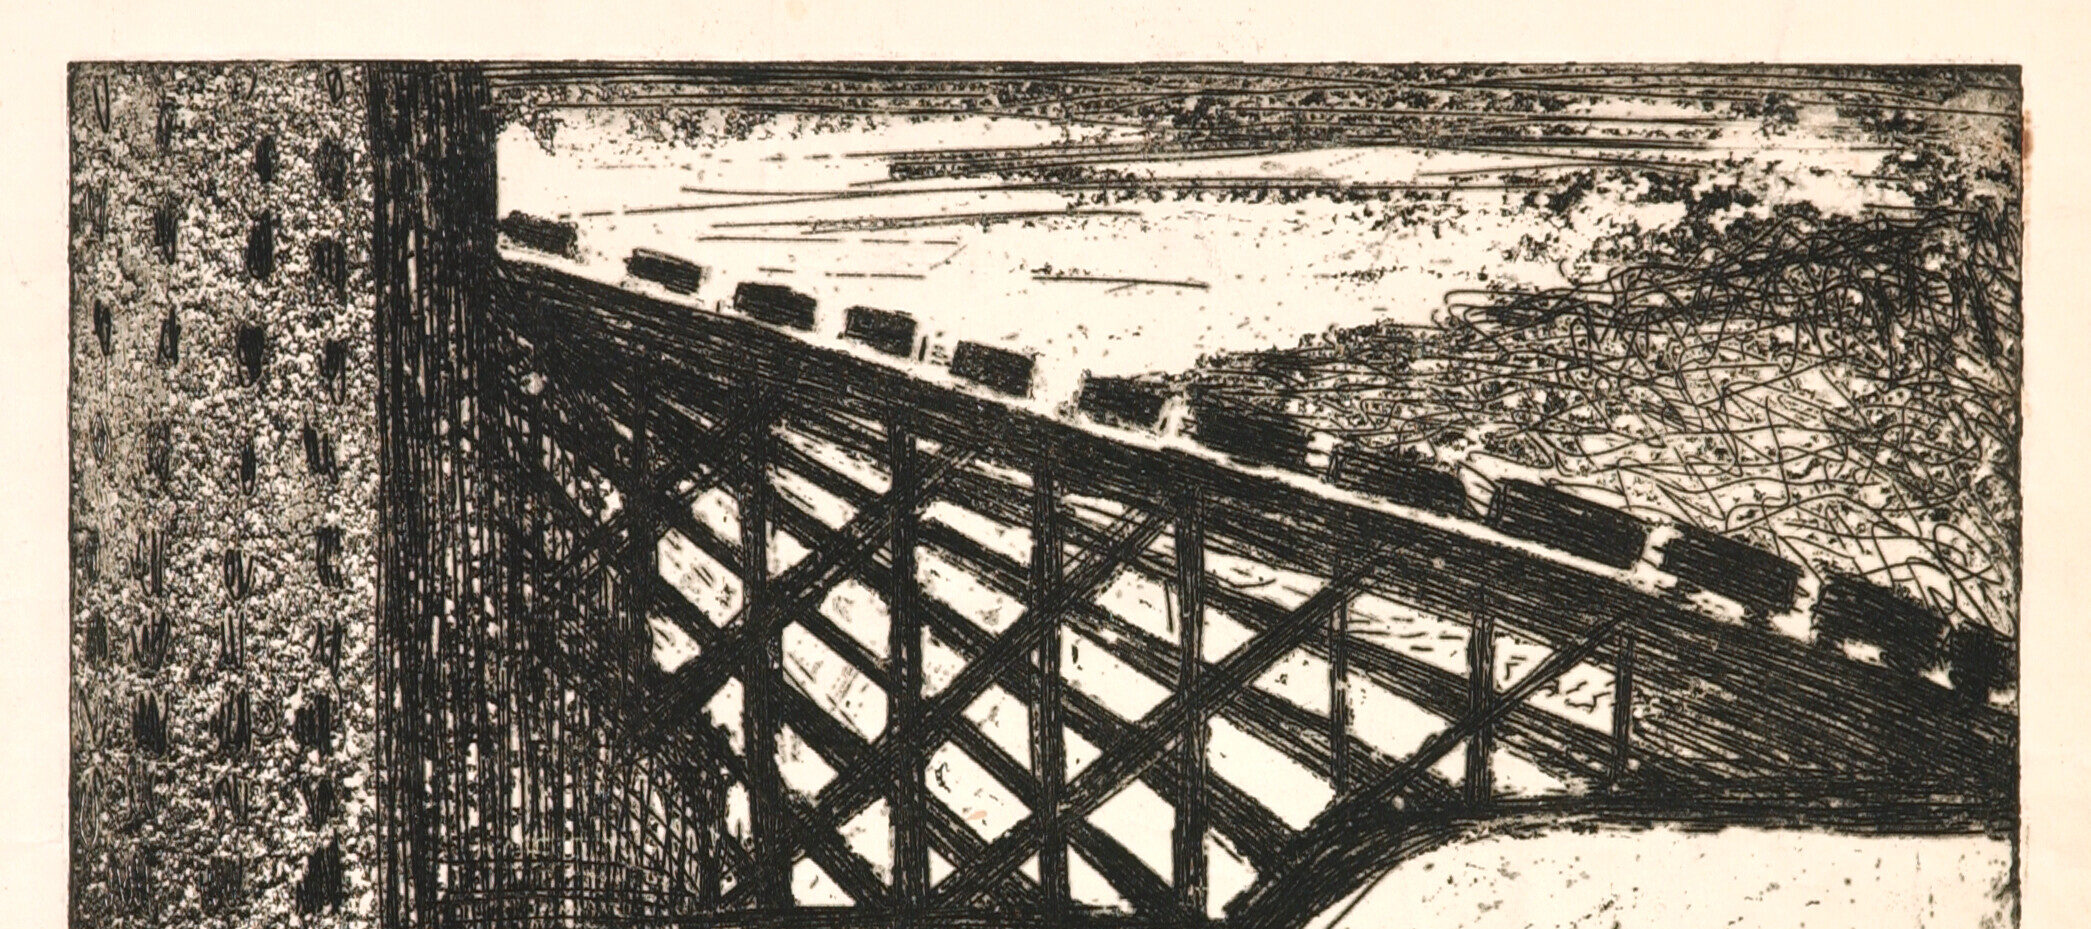 Etching of a coal mine with several carts transporting coal going up to a piece of machinery.